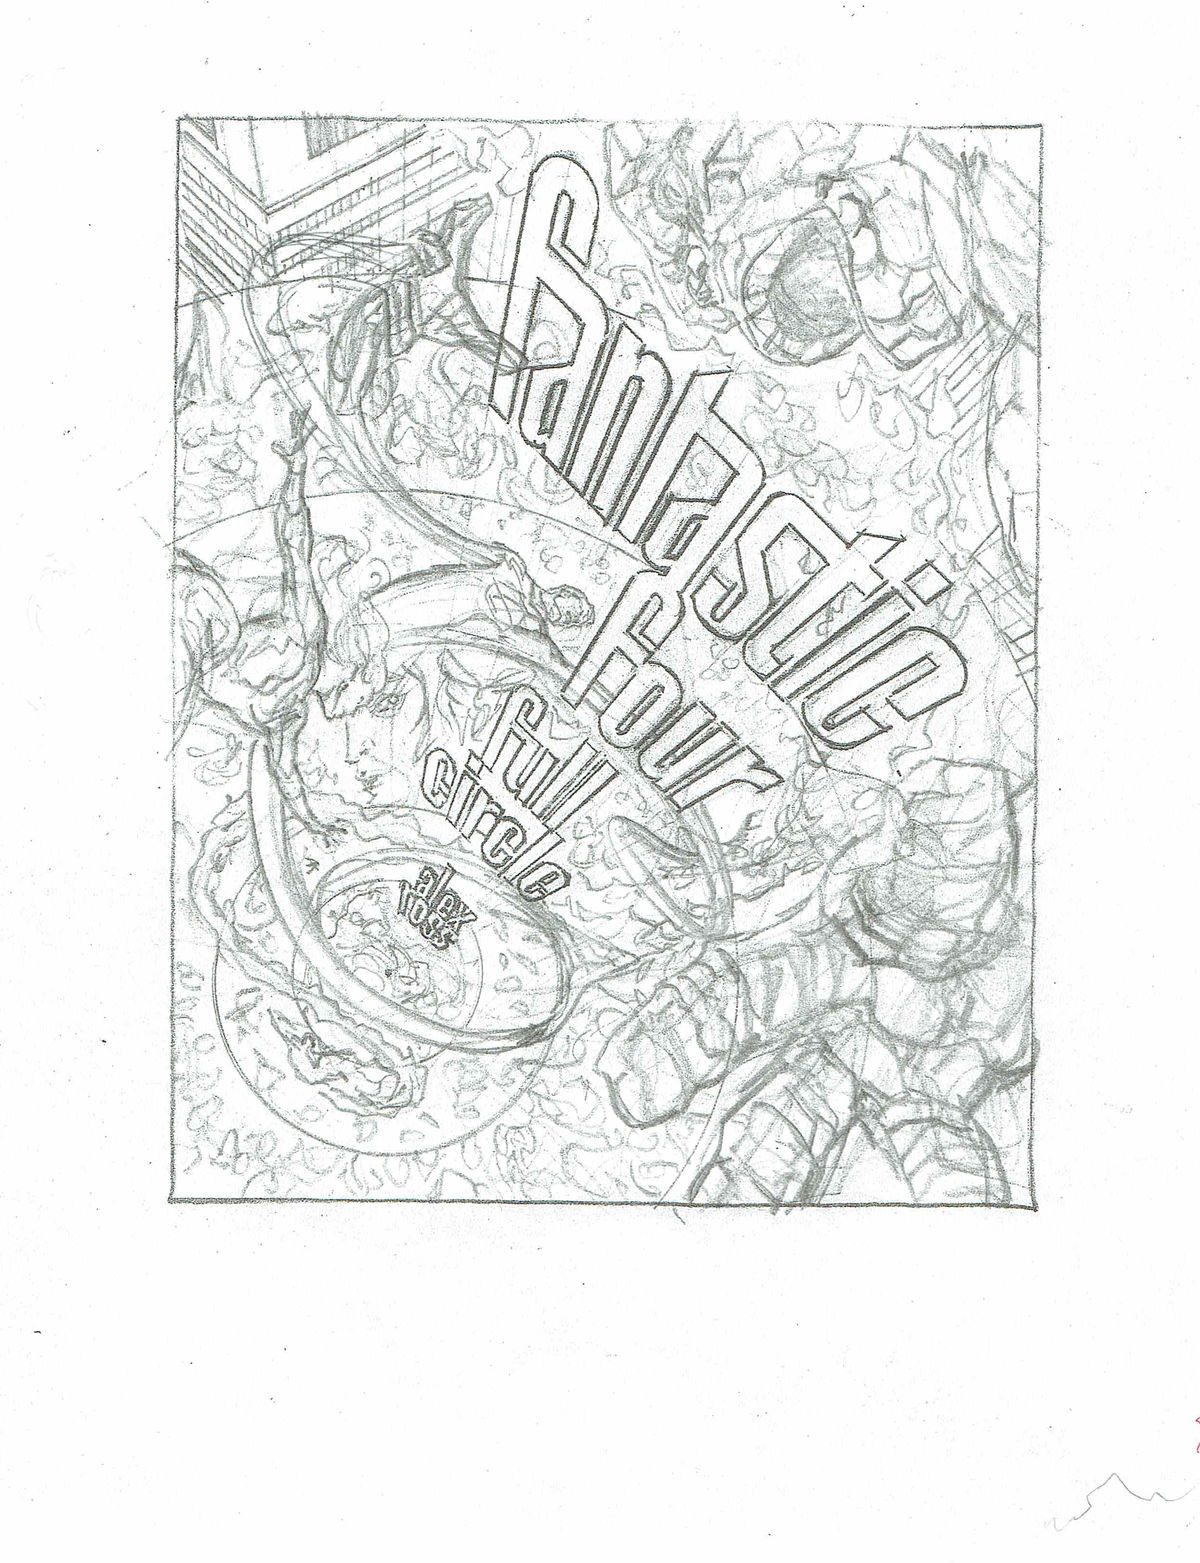 A preliminary sketch of the cover of Fantastic Four: Full Circle.